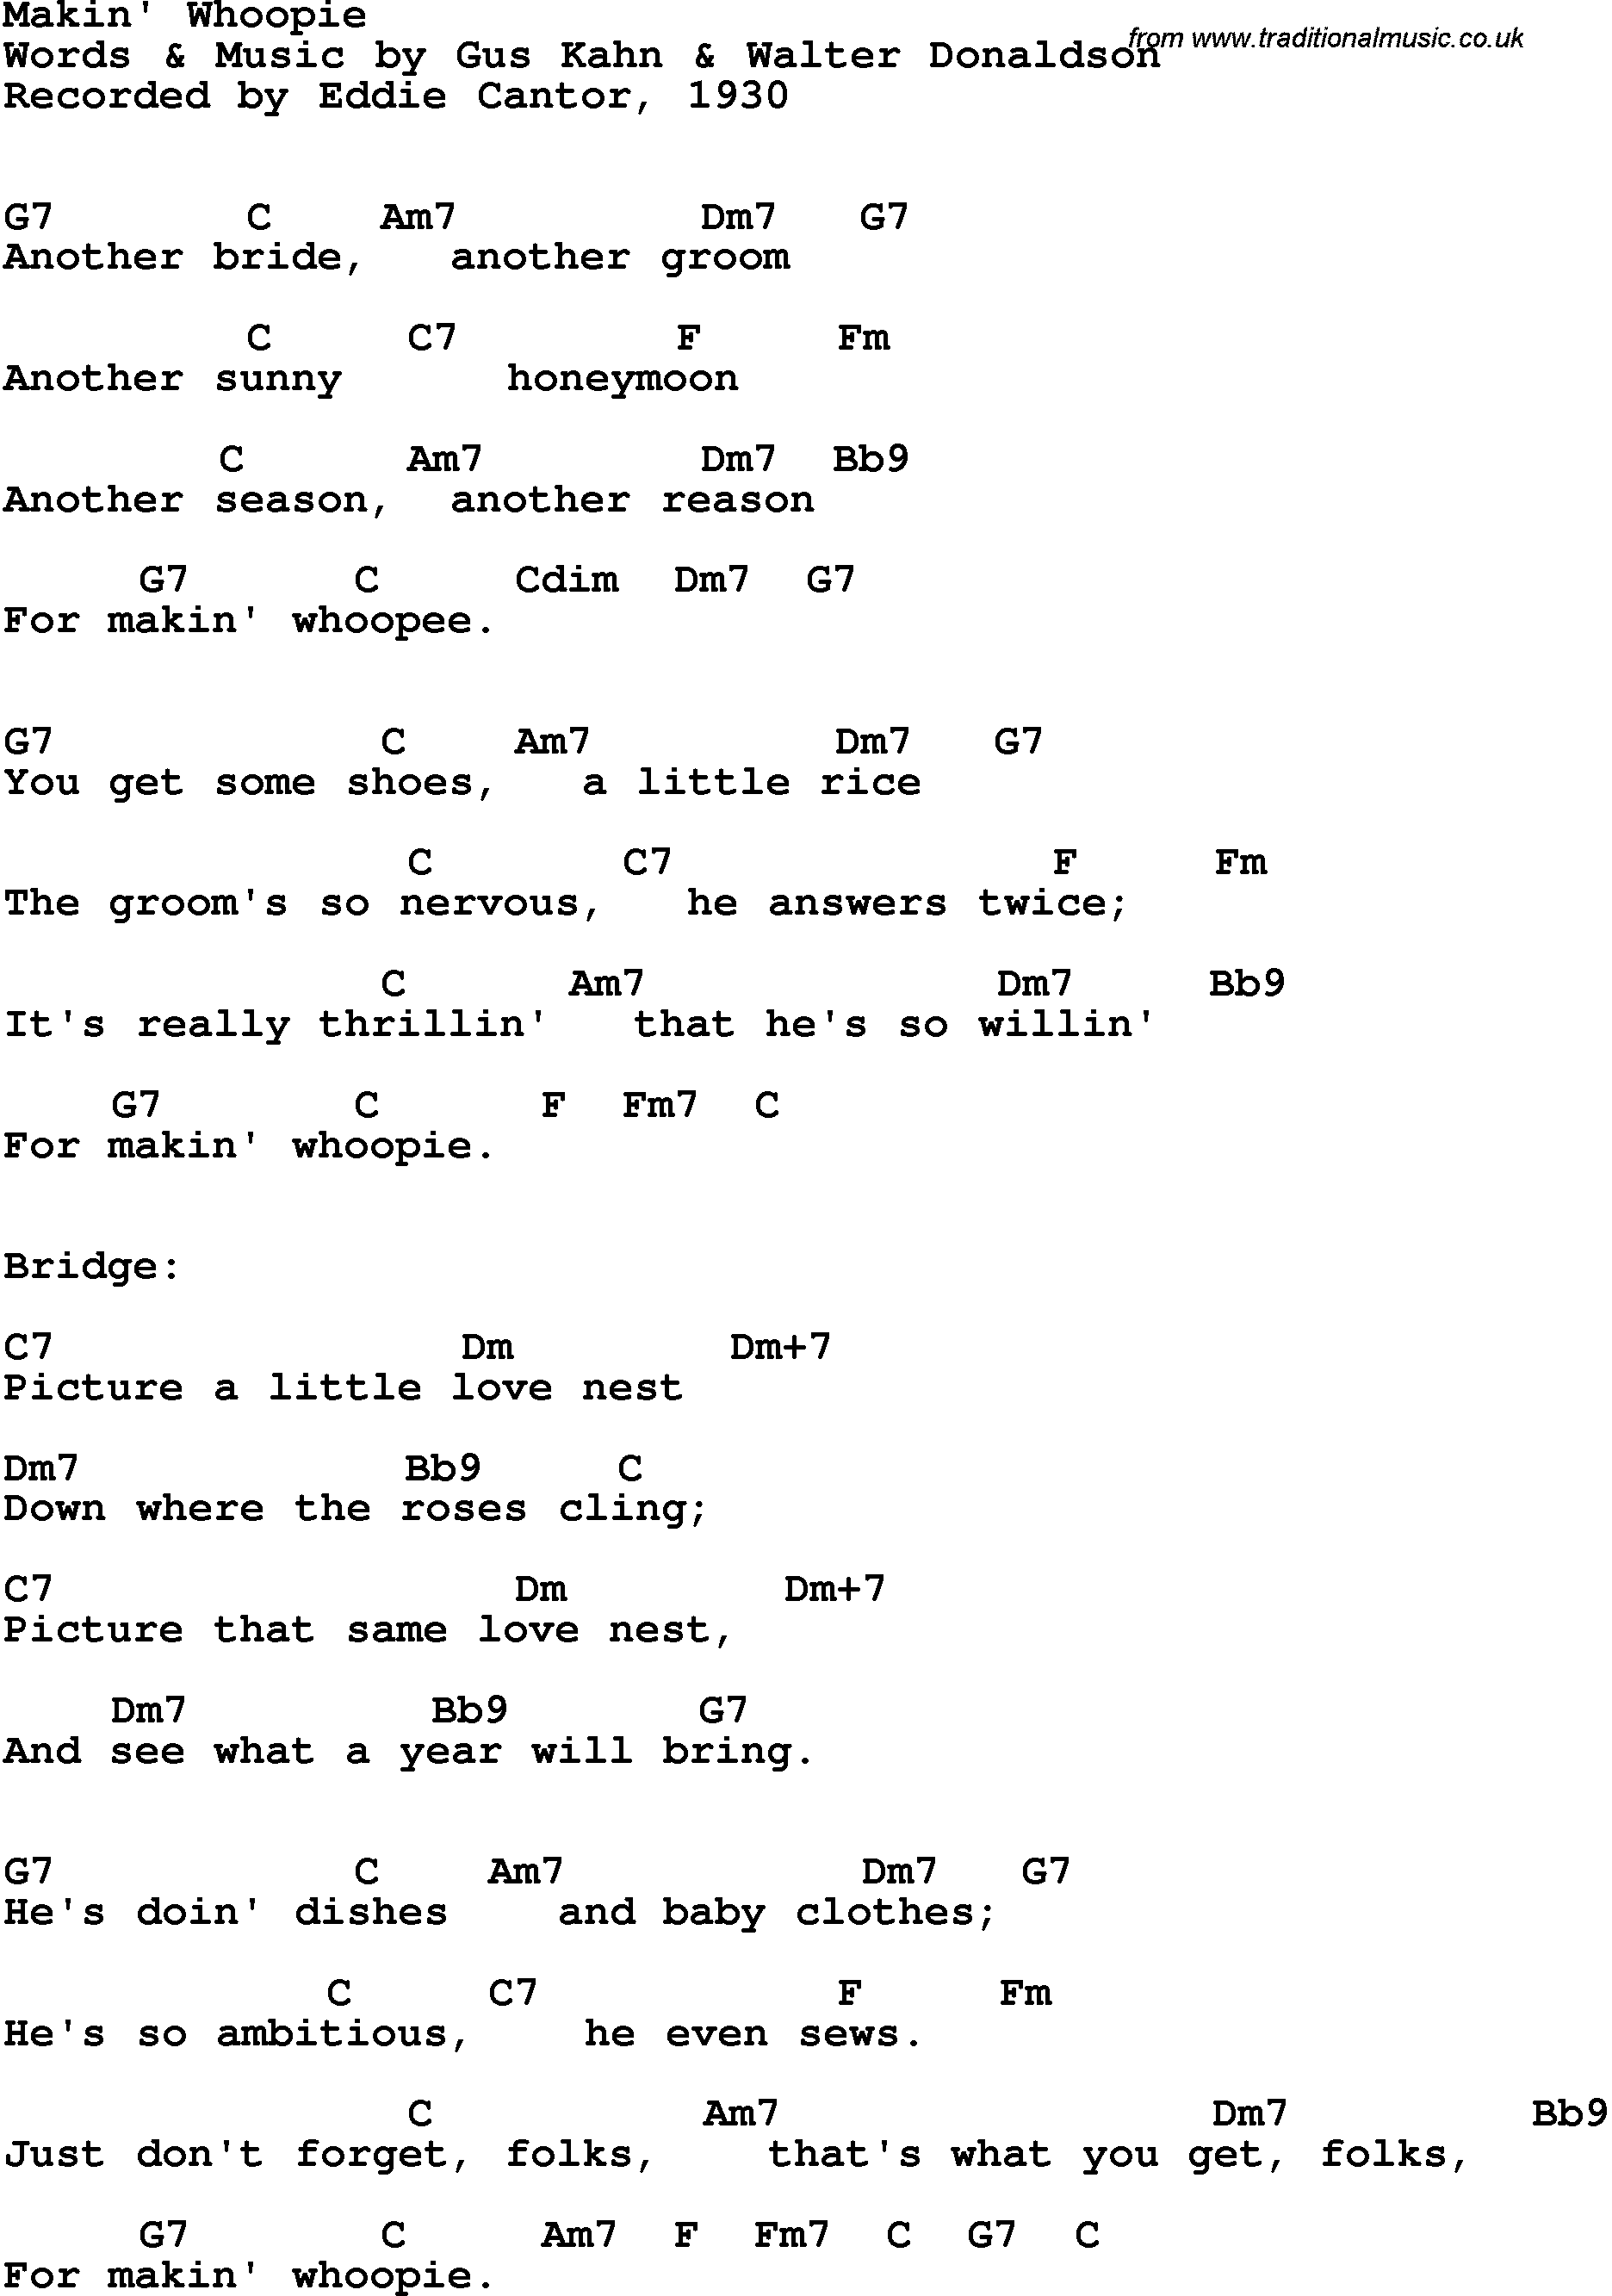 Song Lyrics with guitar chords for Makin' Whoopie - Eddie Cantor, 1930